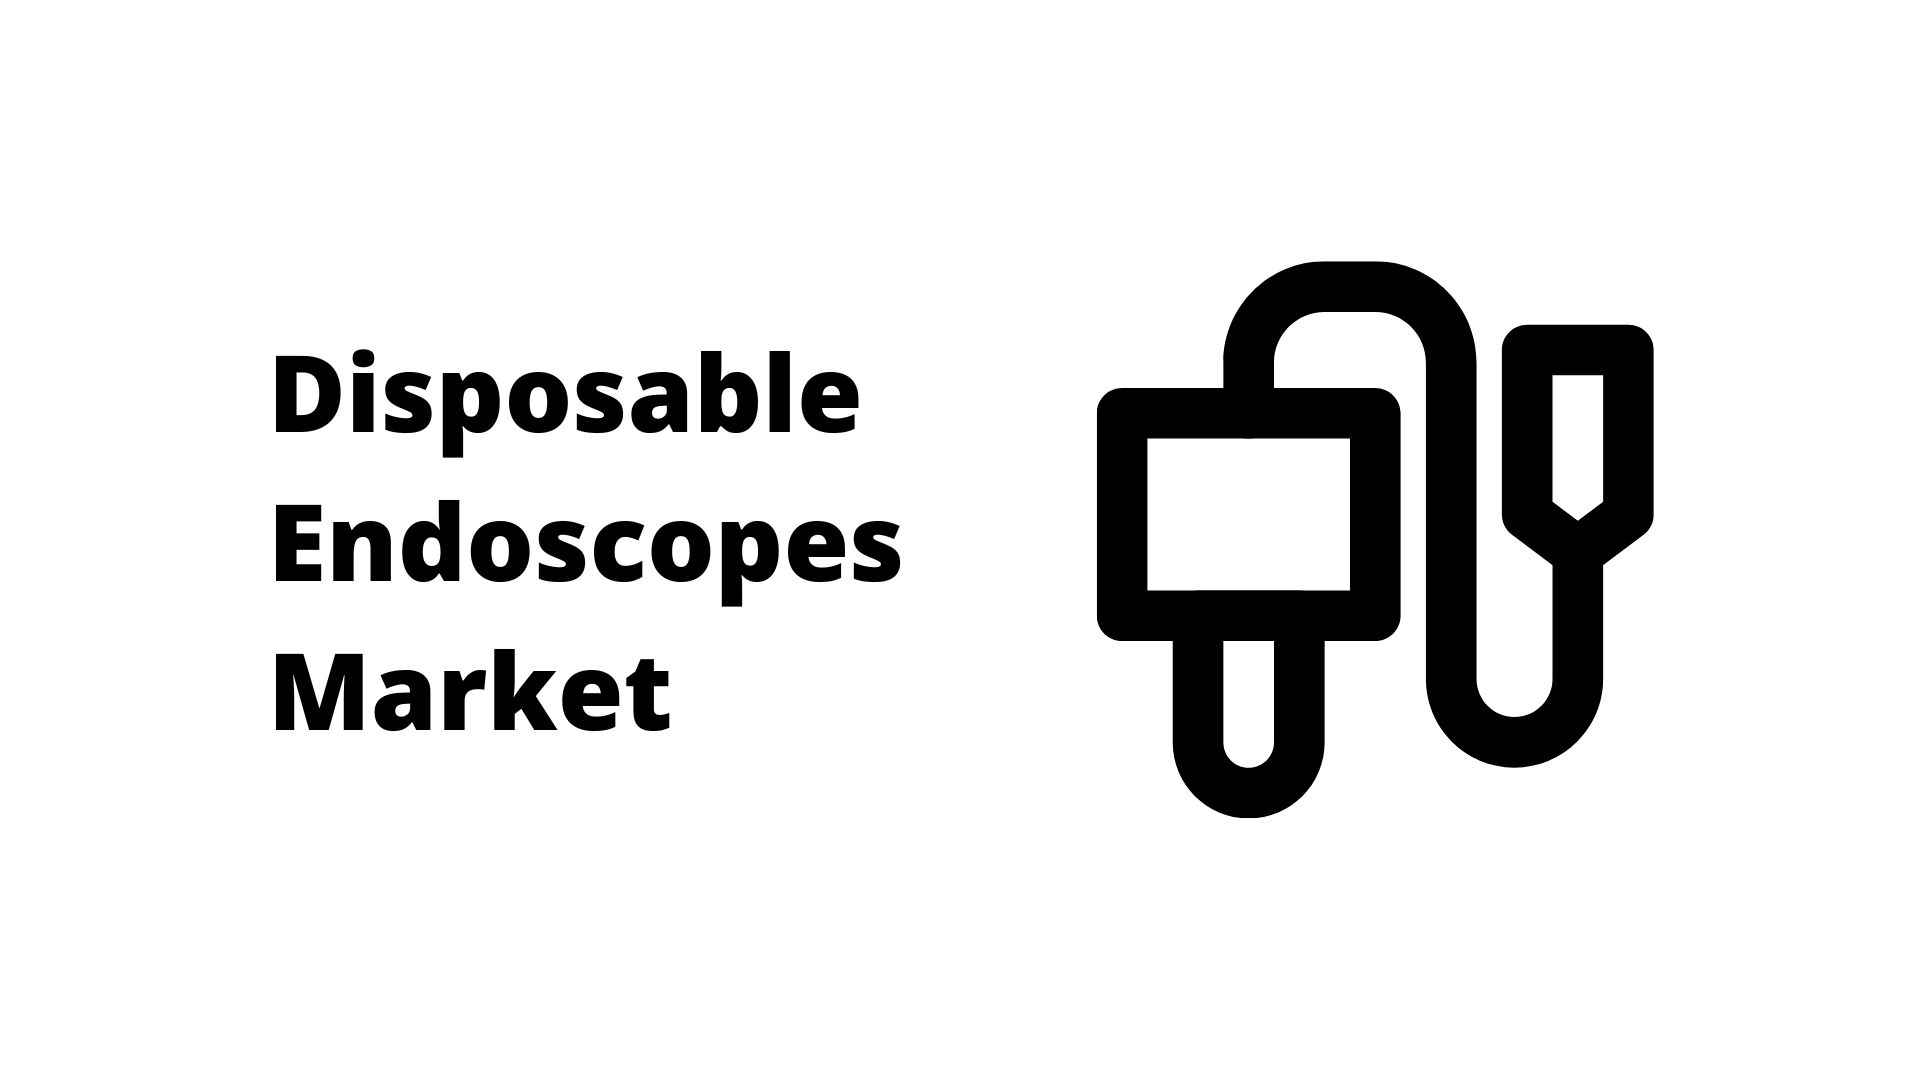 Disposable Endoscopes Market Is Encouraged to Reach USD 8.9 billion by 2032 at a CAGR of 17.2%